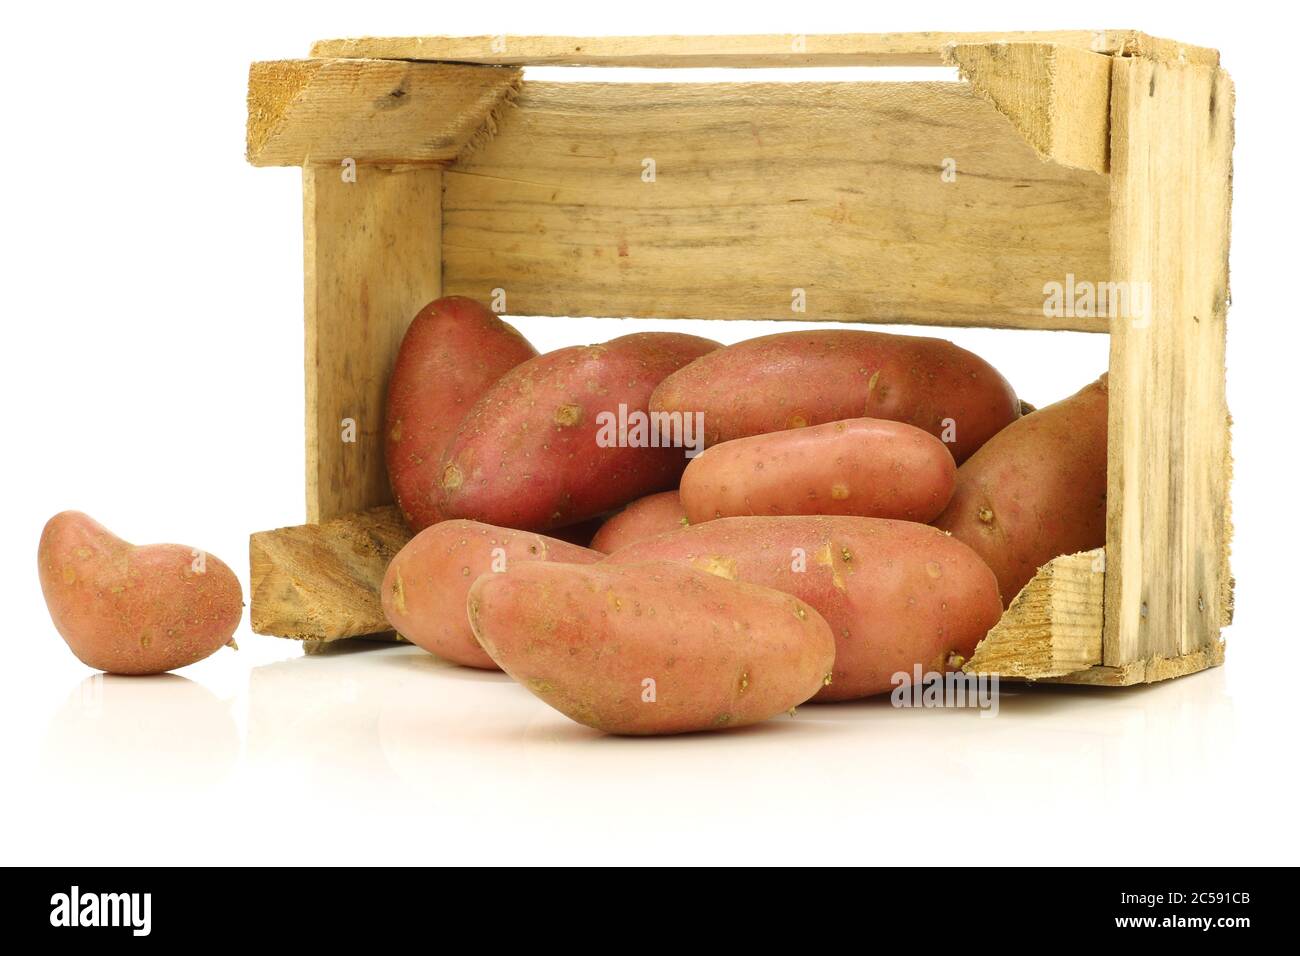 fresh roseval potatoes ina wooden box on a white background Stock Photo